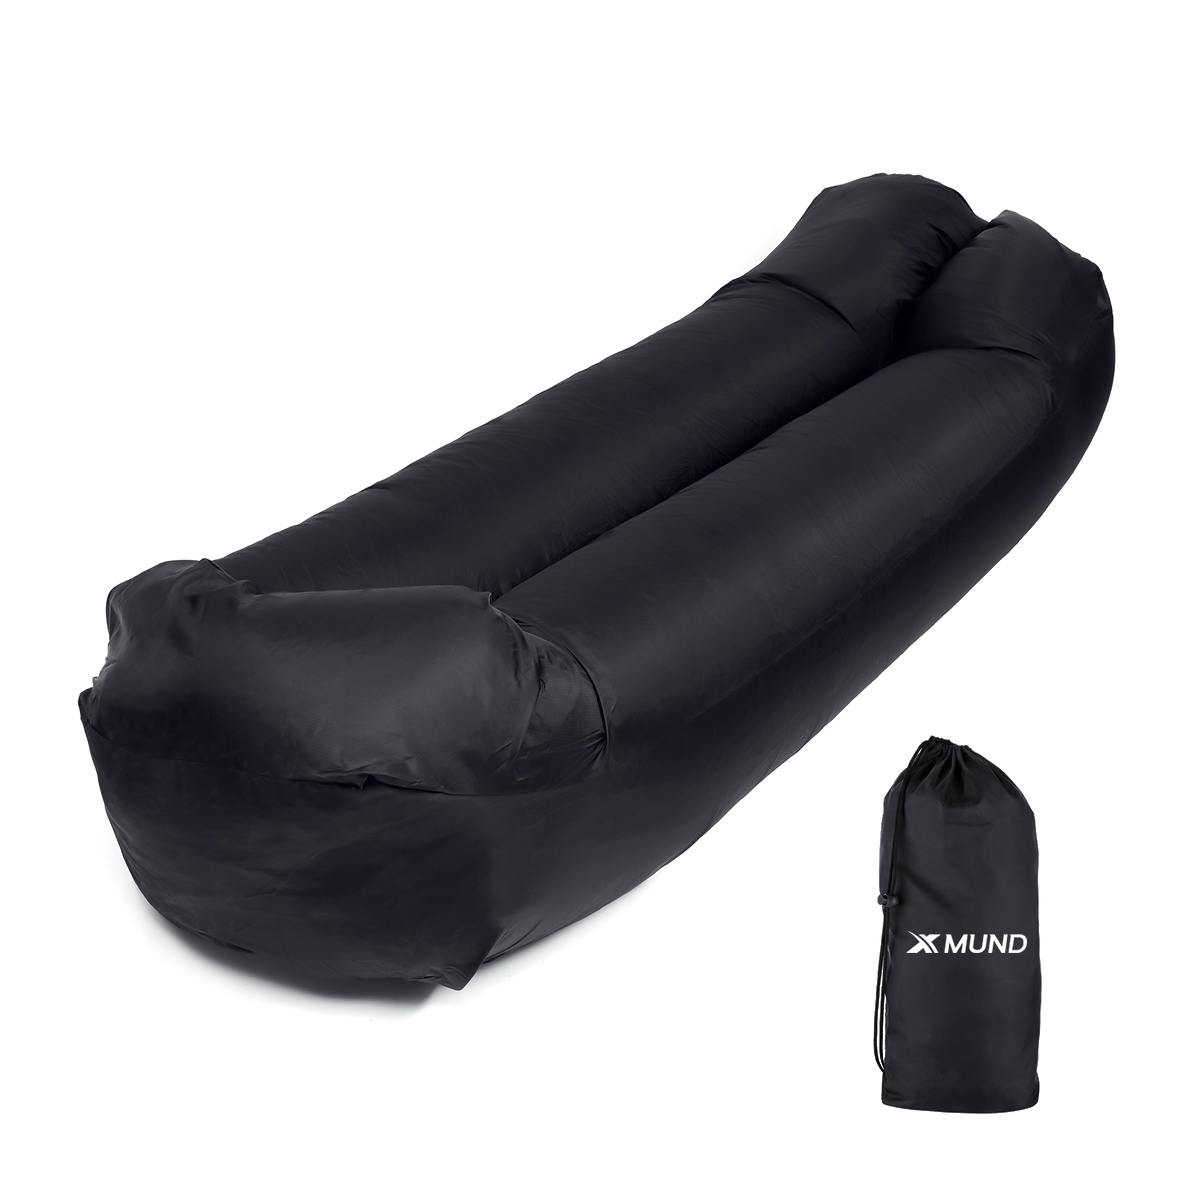 Xmund XD-IF1 210T Inflatable Sofa Camping Travel Air Lazy Sofa Sleeping Sand Beach Lay Bag Couch 10